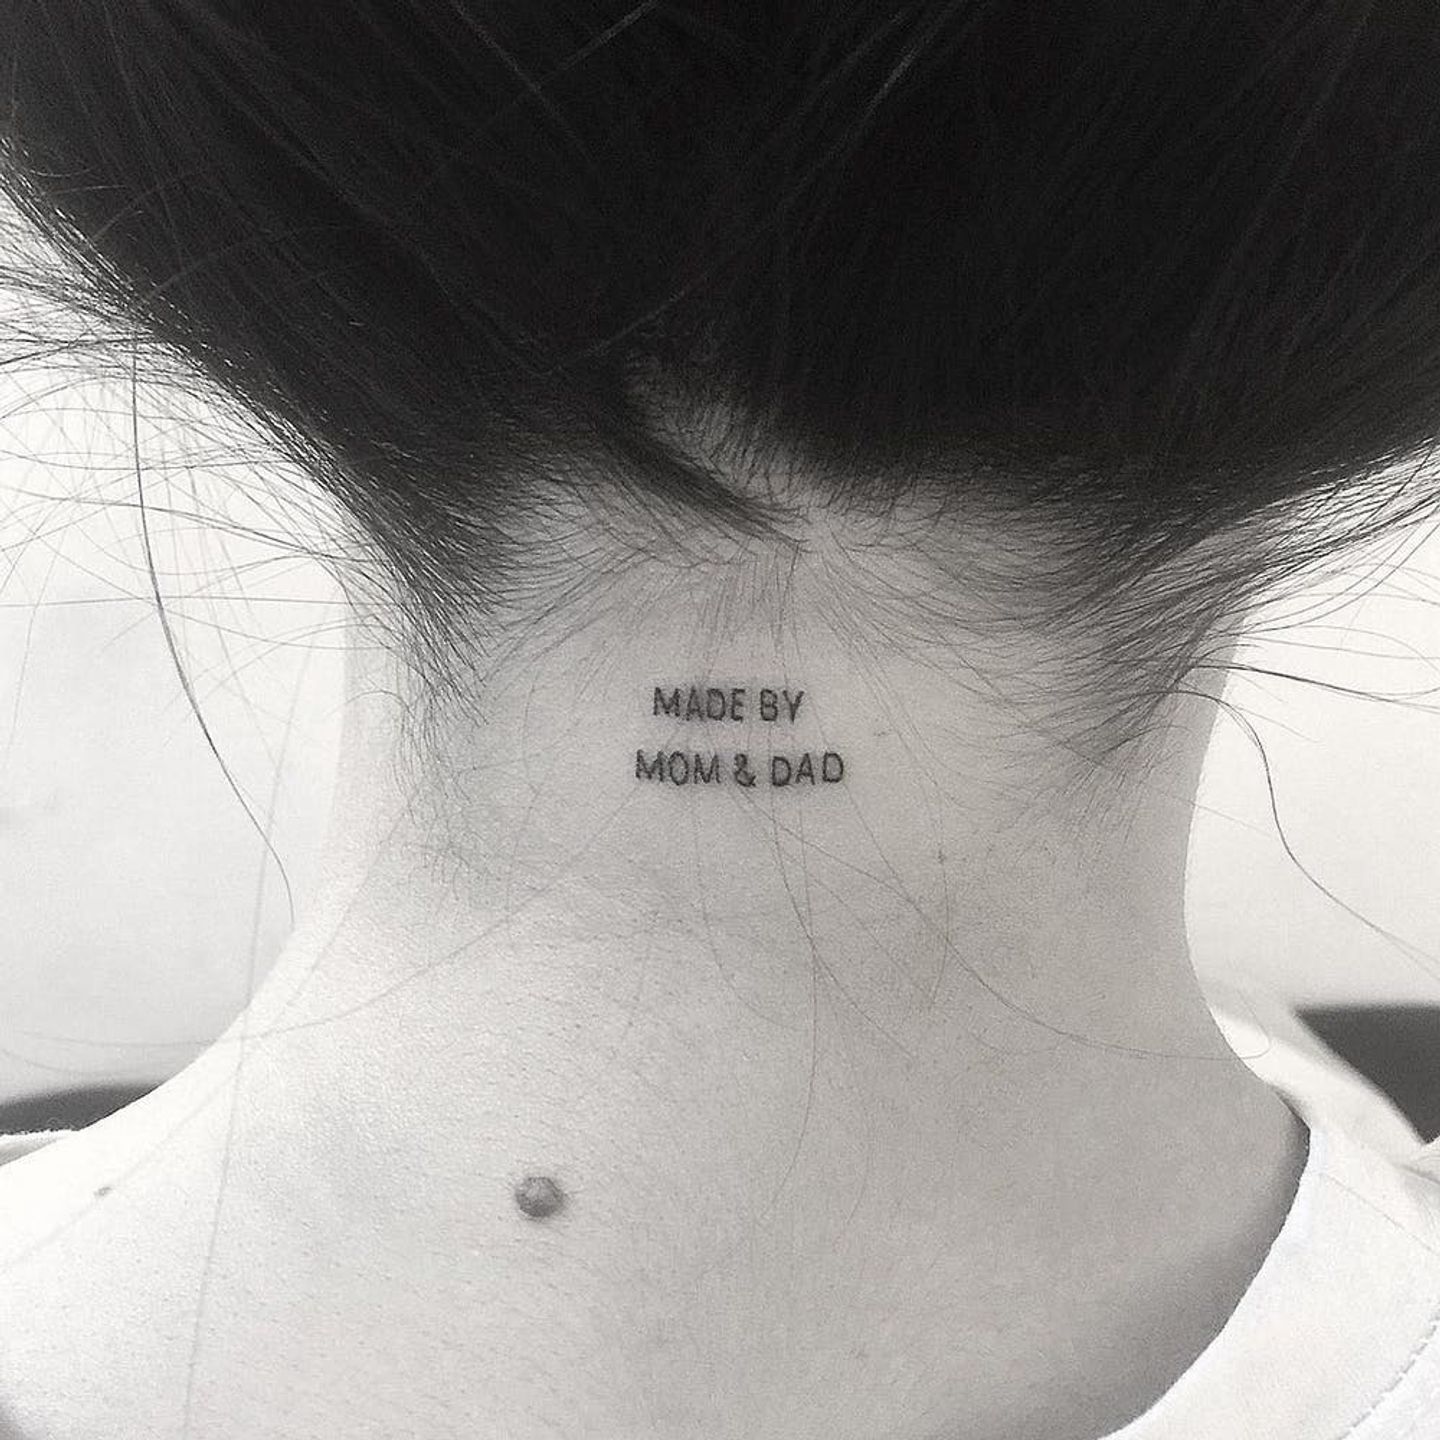 40 Small Tattoo Ideas to Copy Now